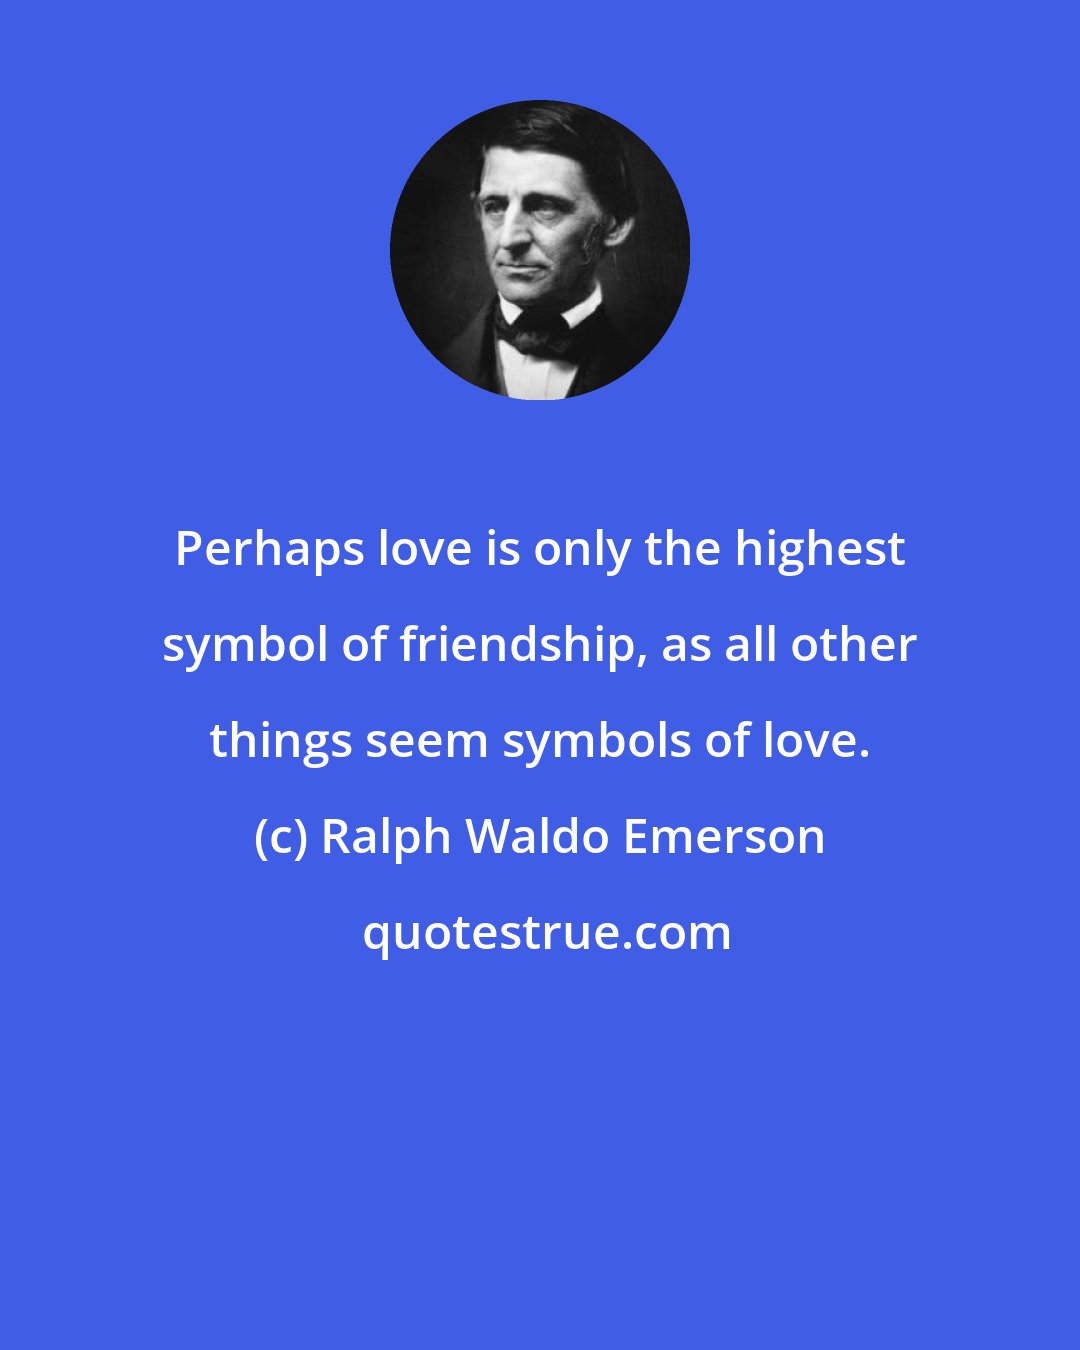 Ralph Waldo Emerson: Perhaps love is only the highest symbol of friendship, as all other things seem symbols of love.